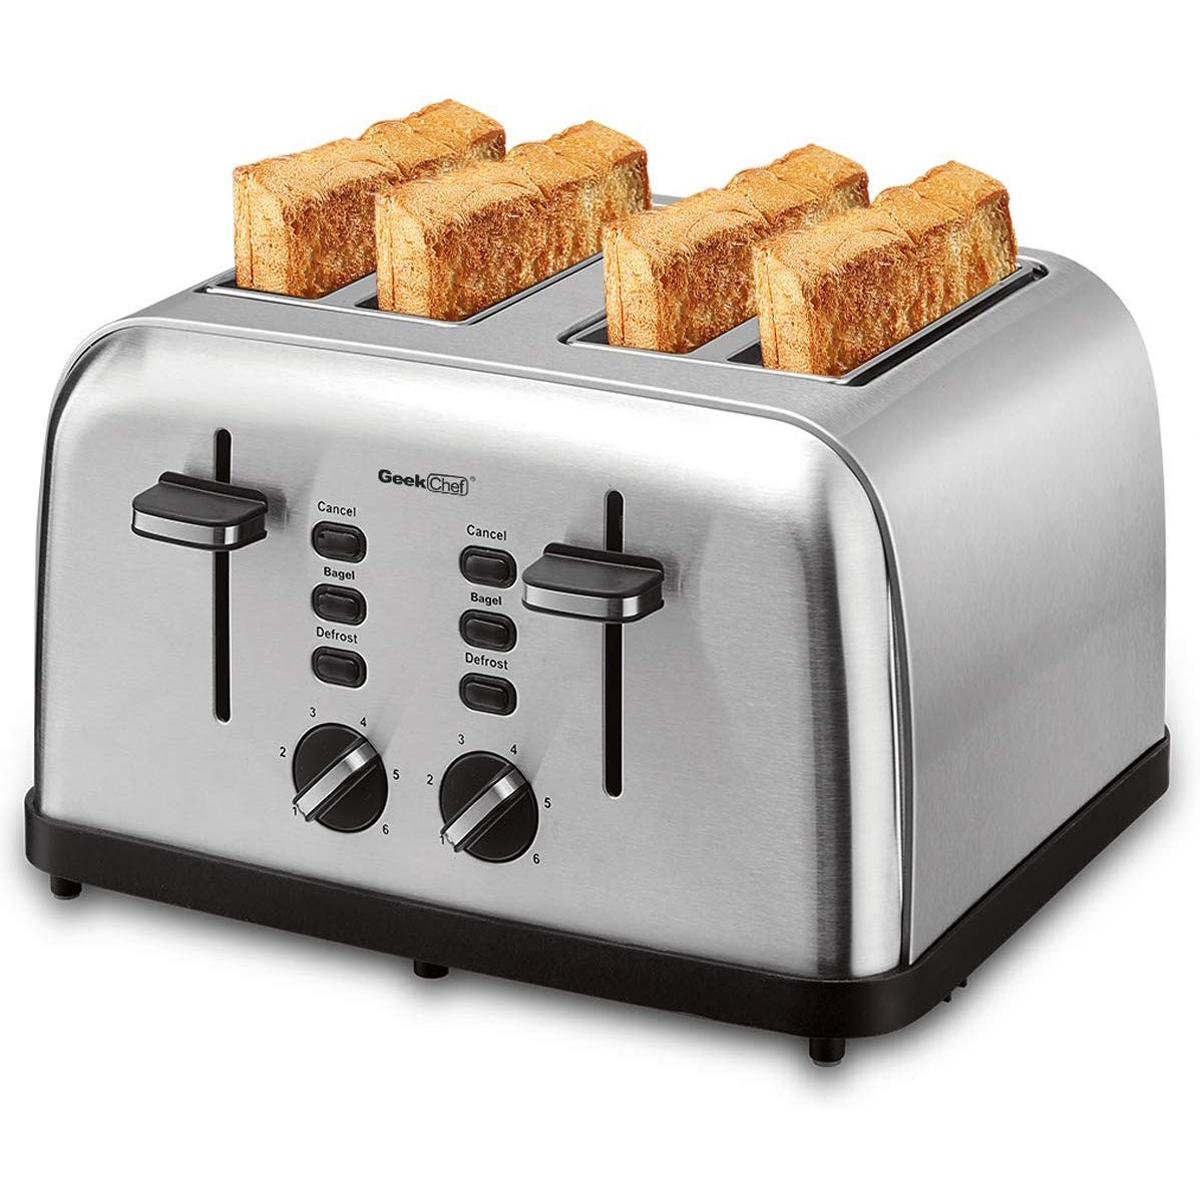 Toaster 4 Slice, Extra Wide Slots Four Slice Toaster, Bagel/Defrost/Cancel Functions, 6 Browning Settings, Removable Crumb Tray, Auto Pop-up, Stainless Steel(no amazon sale)-Boyel Living